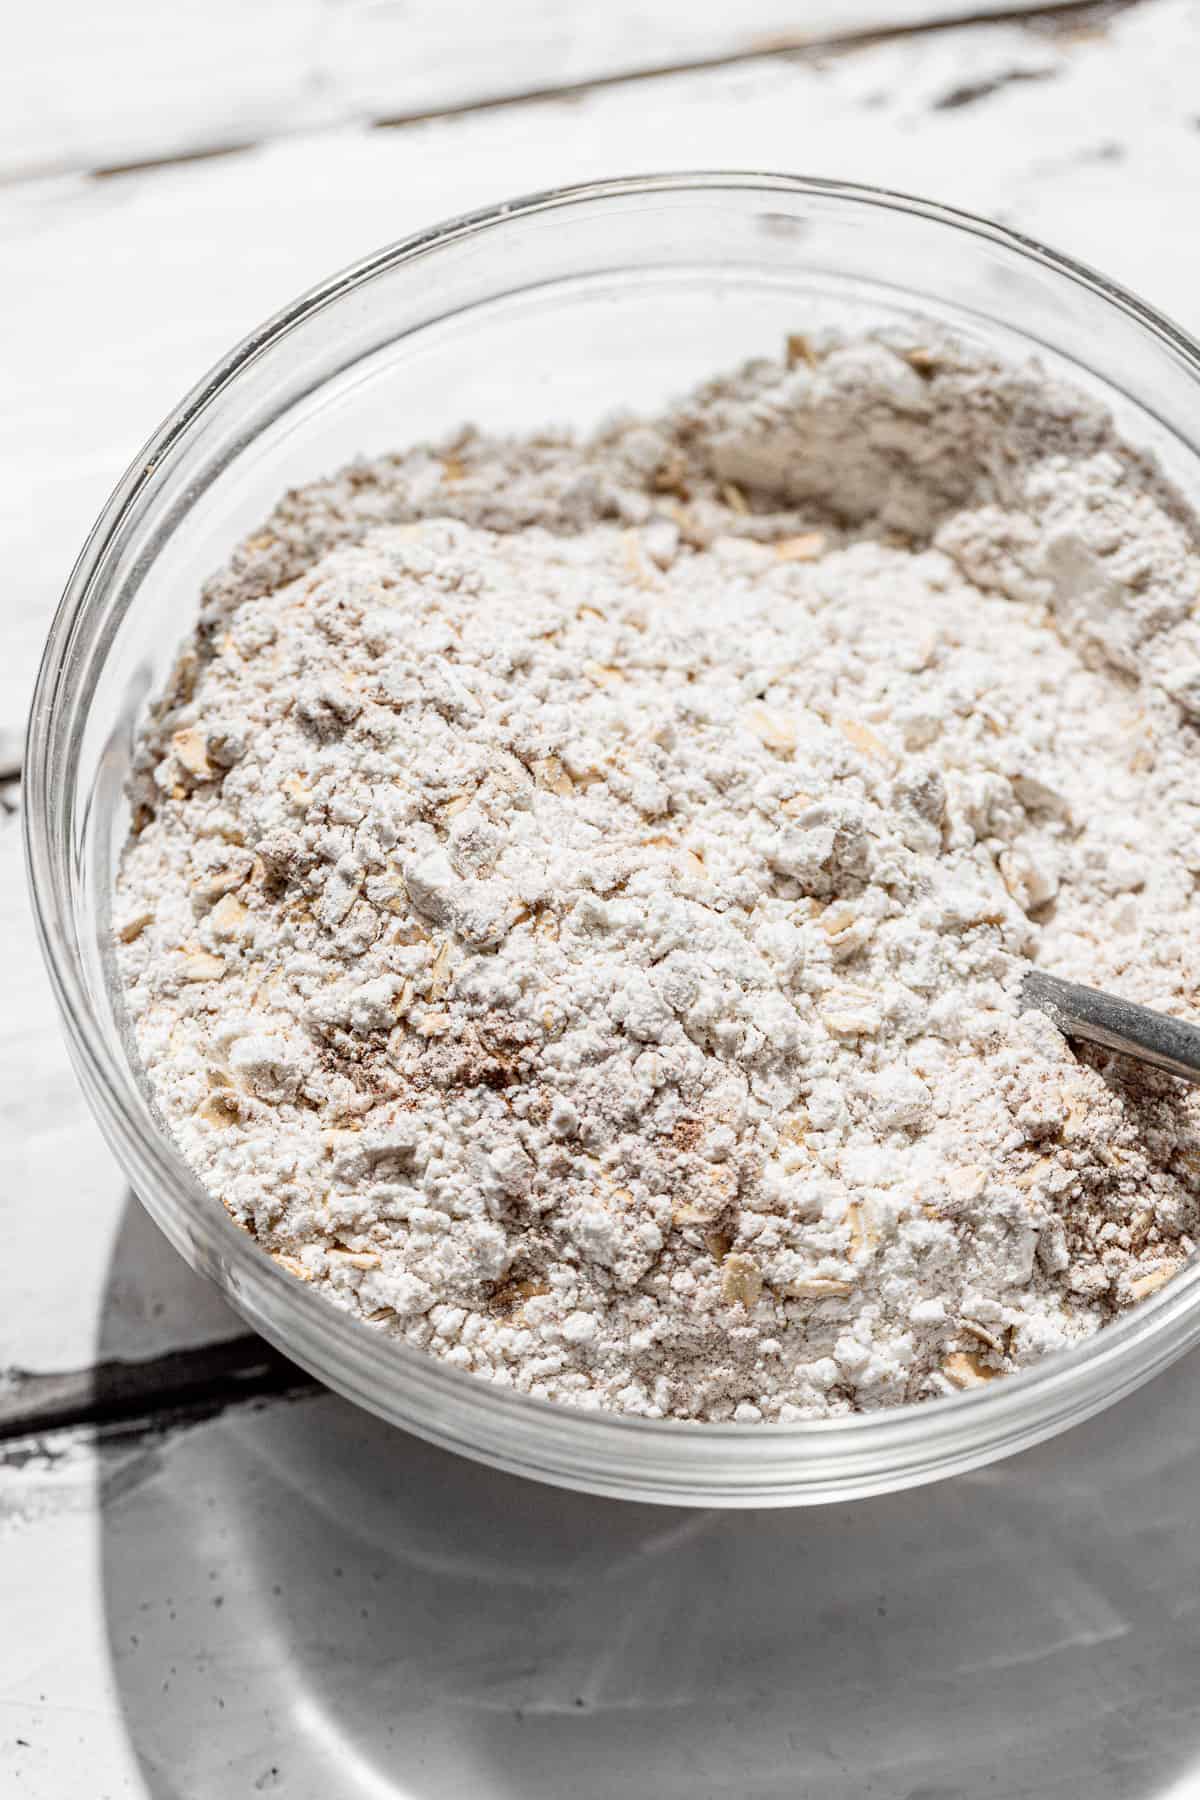 dry ingredients in a glass bowl on a white surface.